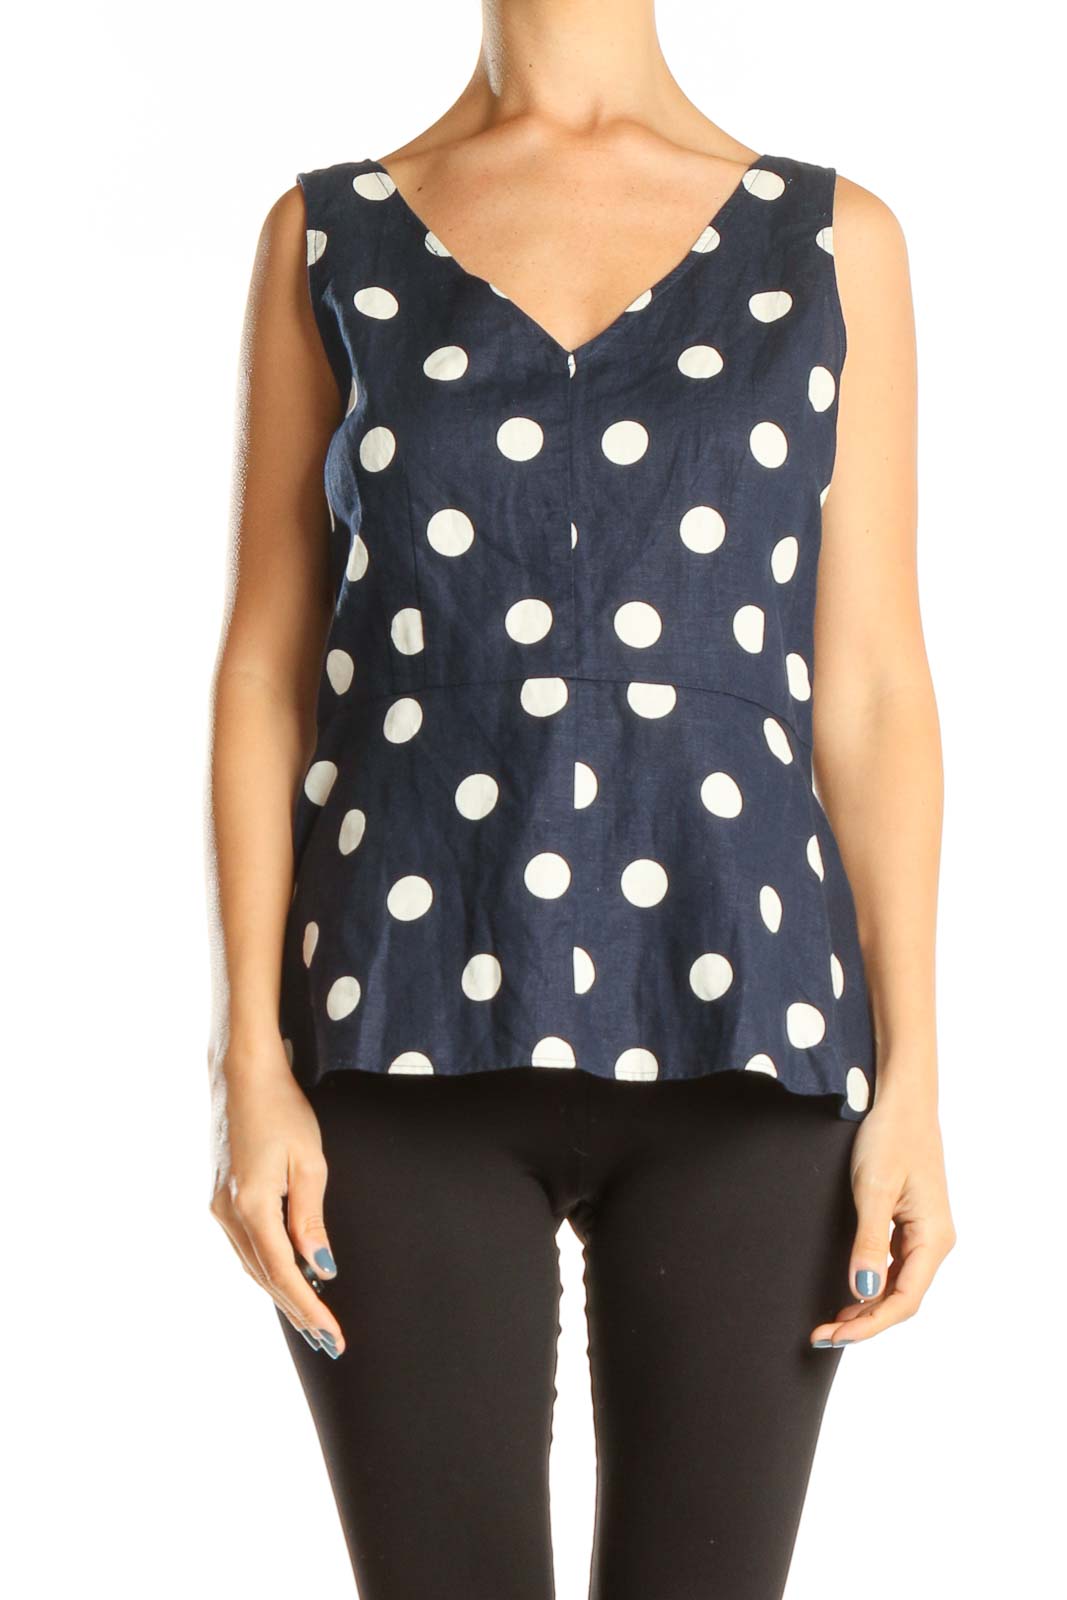 Blue Polka Dot Chic Blouse Front